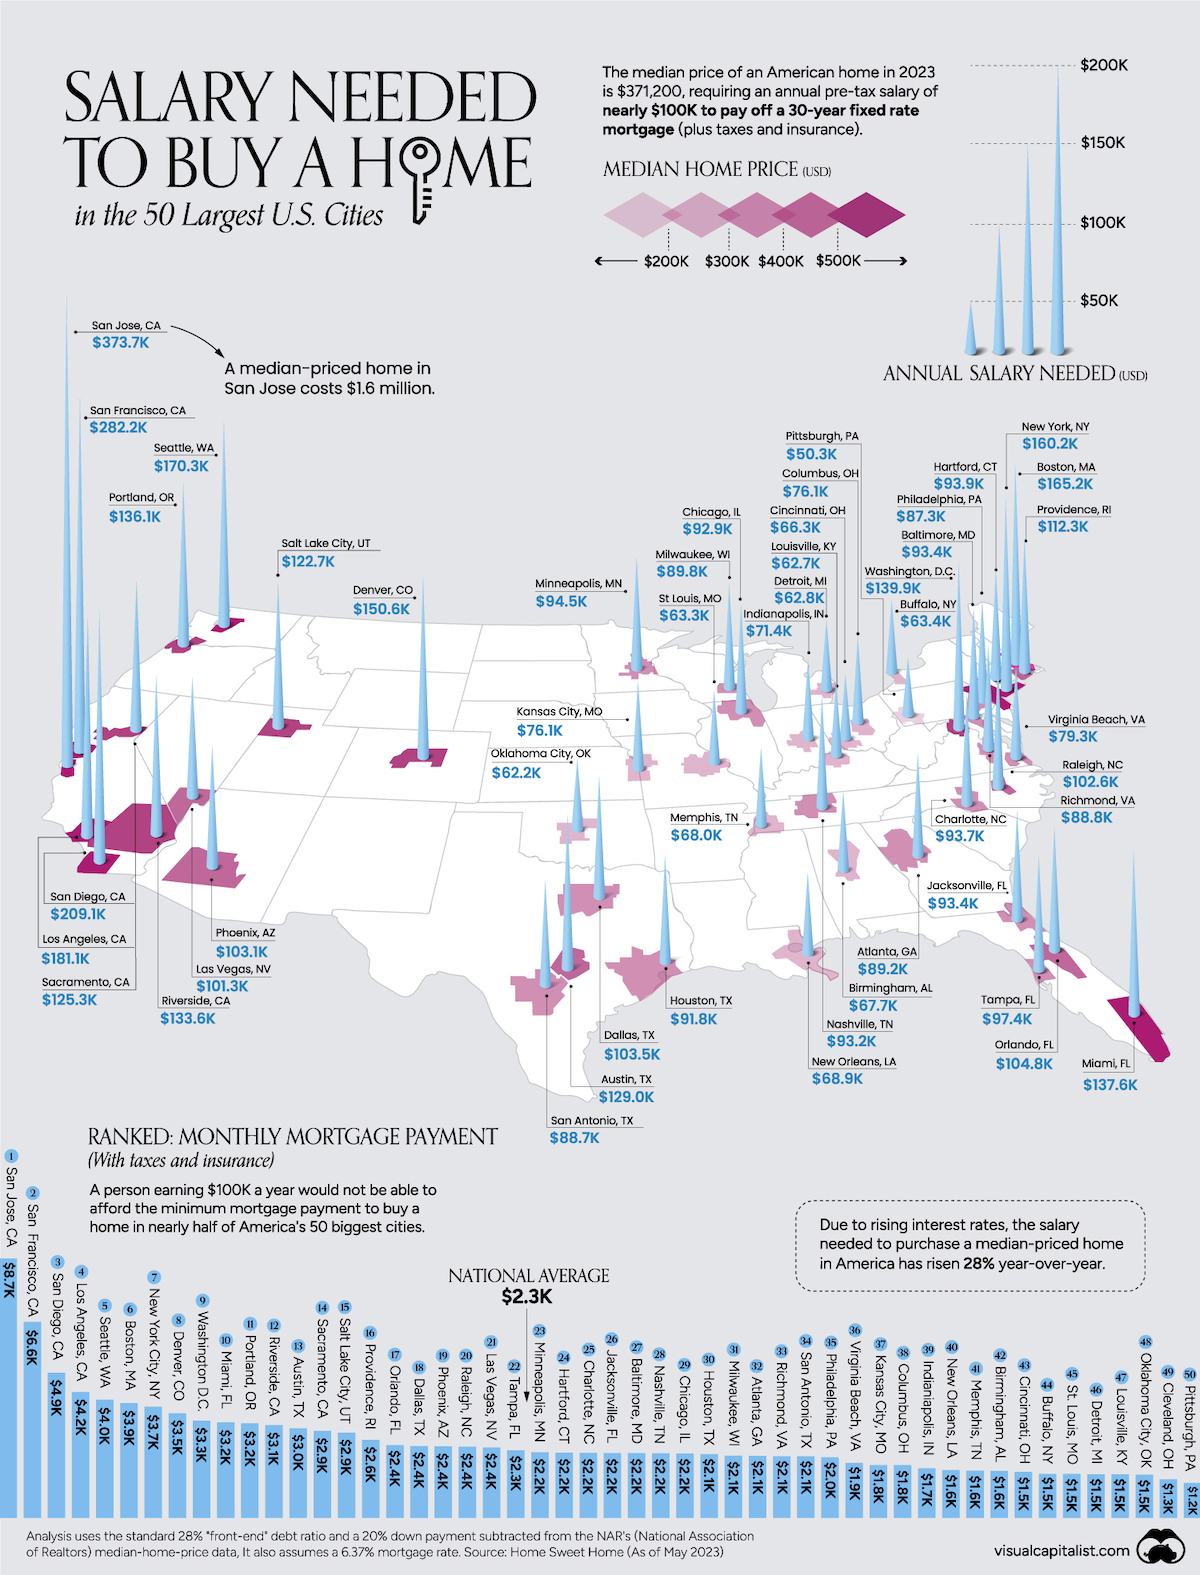 A map of the U.S. with the median home price as well as the salary needed to own a home 50 American cities.